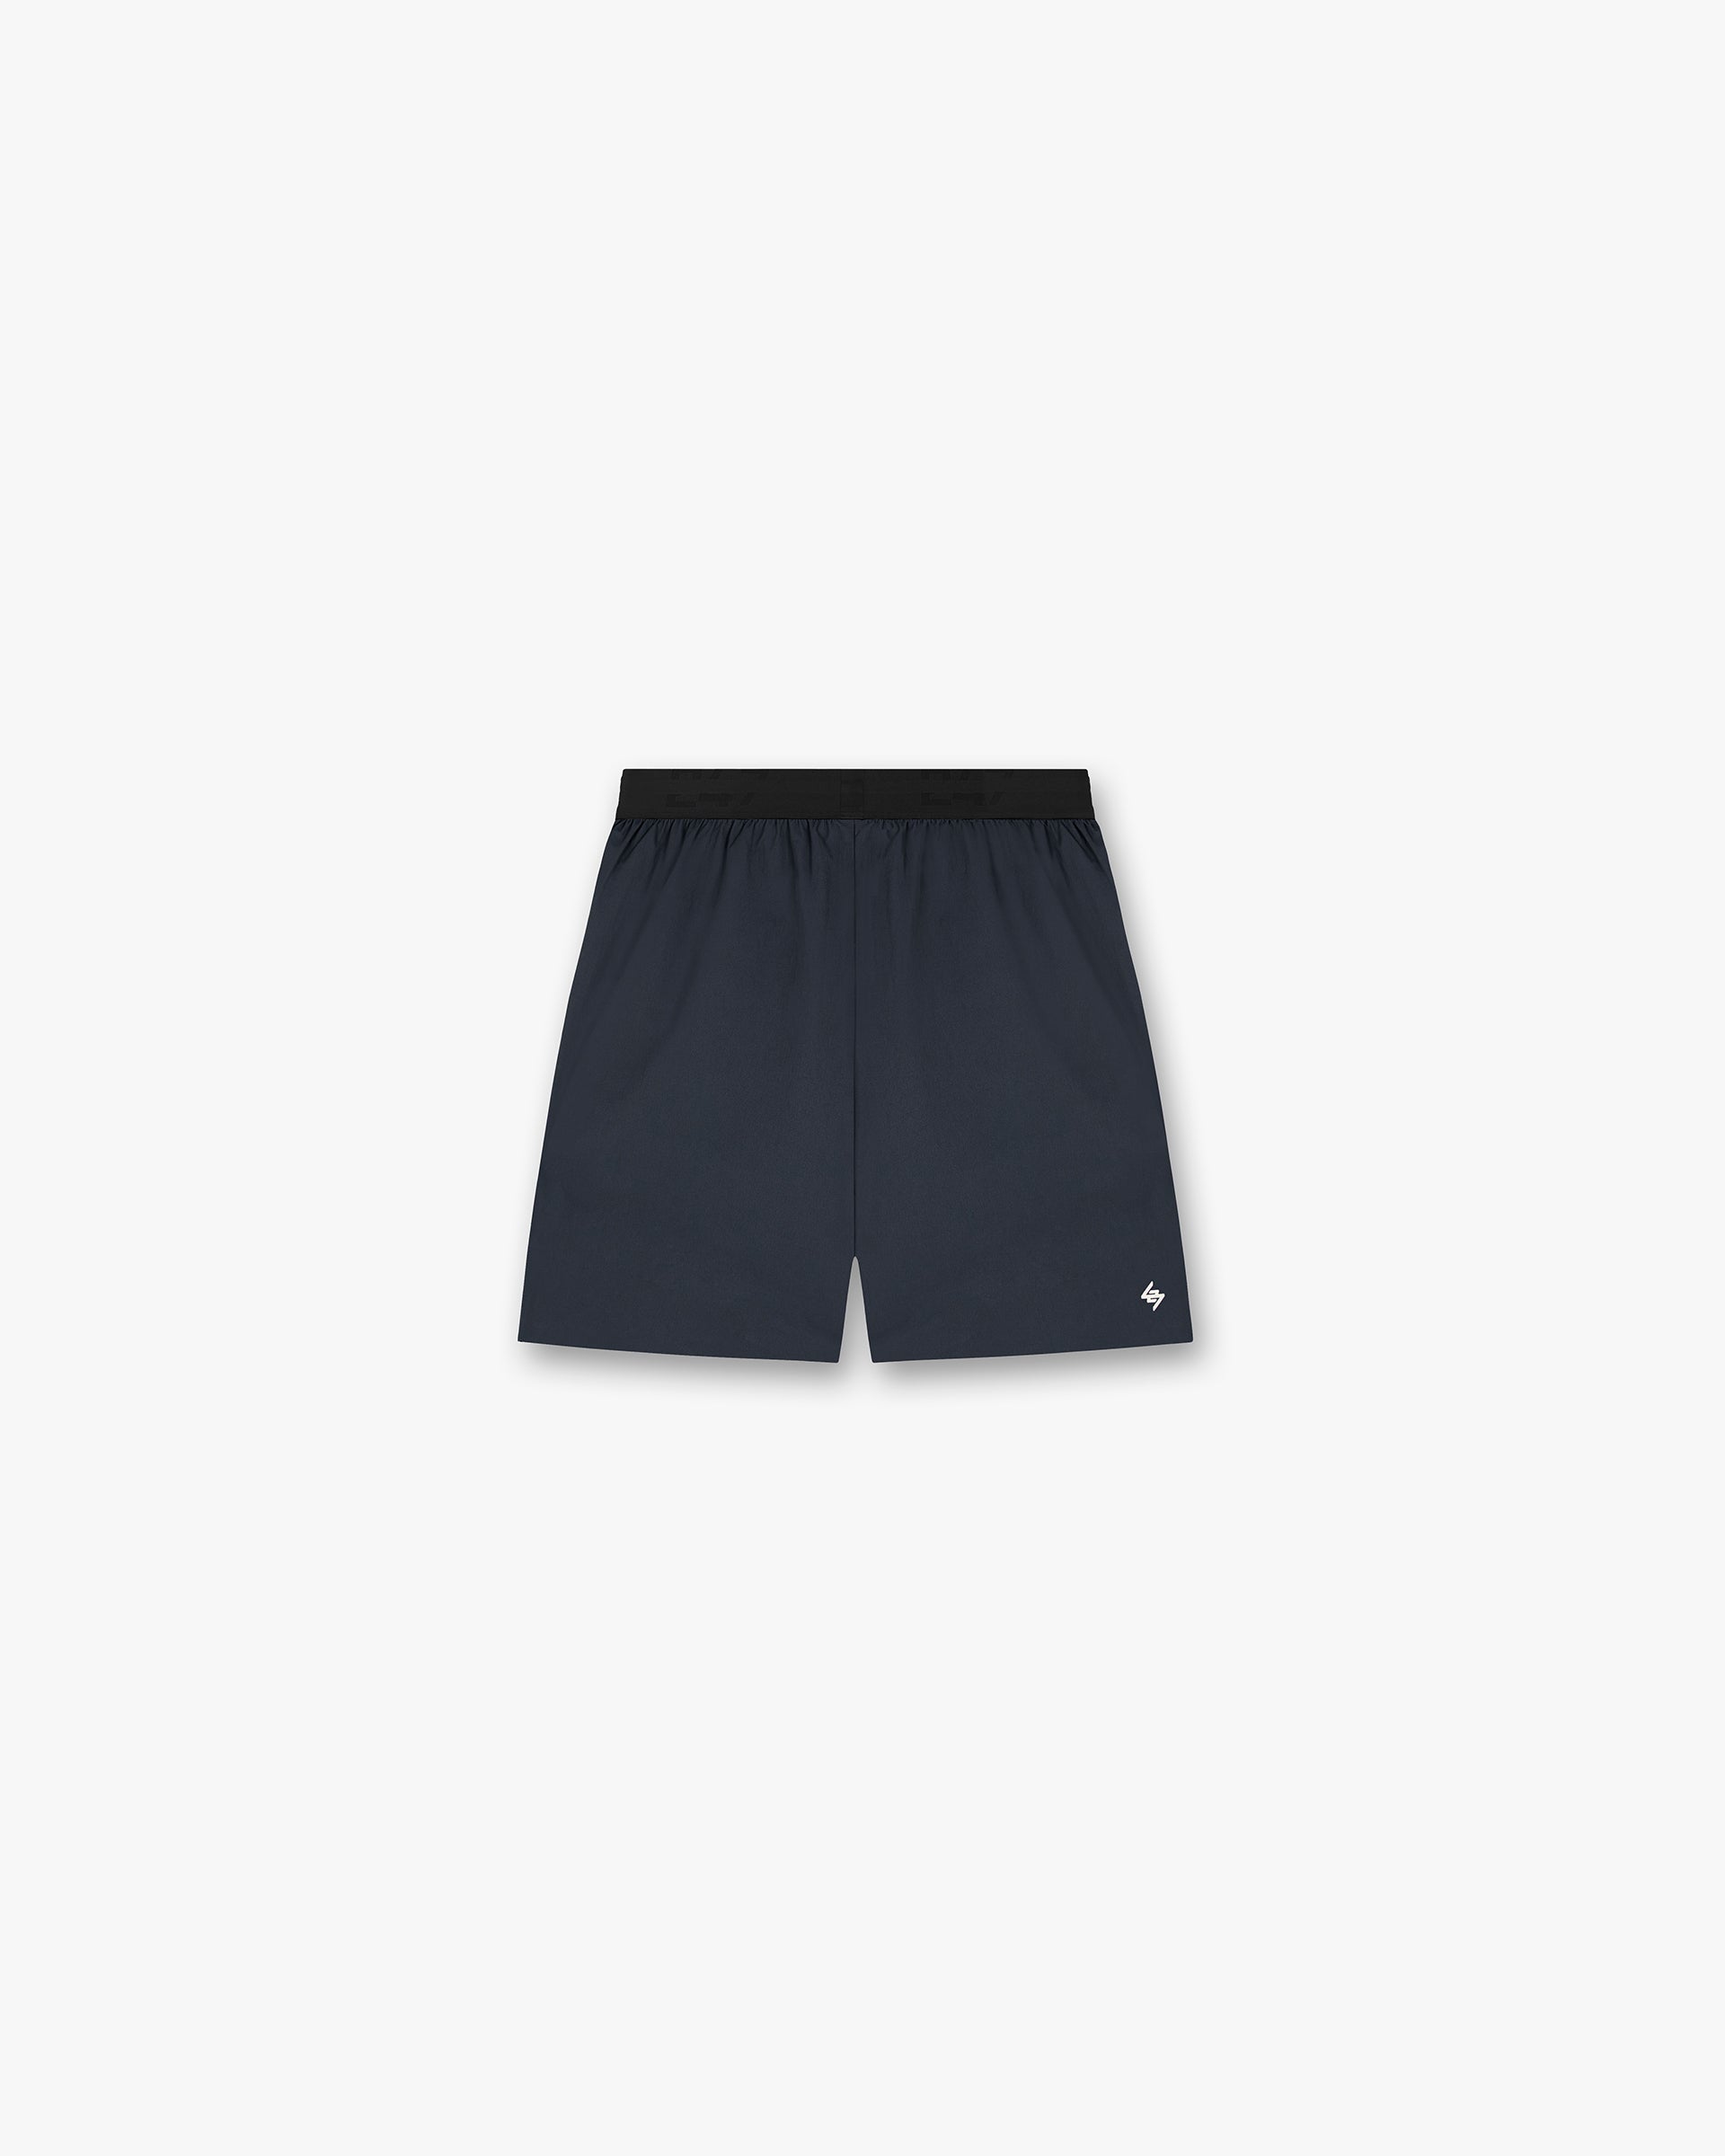 Represent 247 Fused Shorts Navy